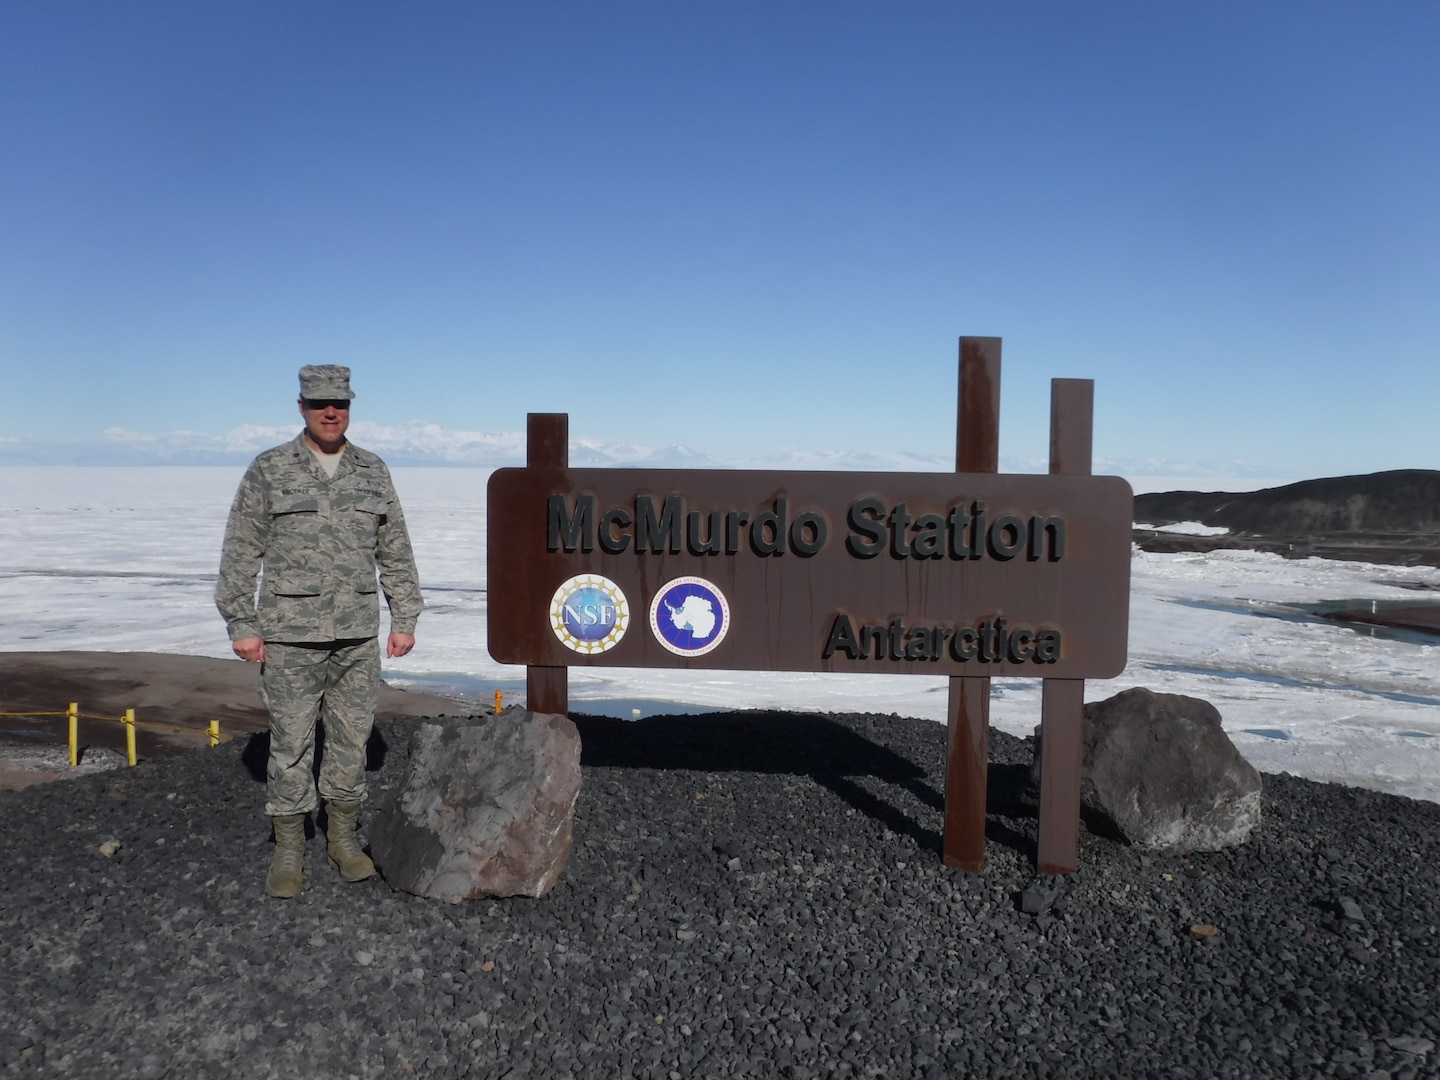 U.S. Air Force Chaplain (Maj.) Kraig Kroeker, the 173rd Fighter Wing chaplain, stands for a photo at McMurdo Station on Antarctica where he provided mental health and spiritual support for almost two months in partnership with the National Science Foundation. The foundation relies on the Air National Guard to supply chaplains who are trained to operate in austere environments and who in-turn get to hone their skills in a short period of time.